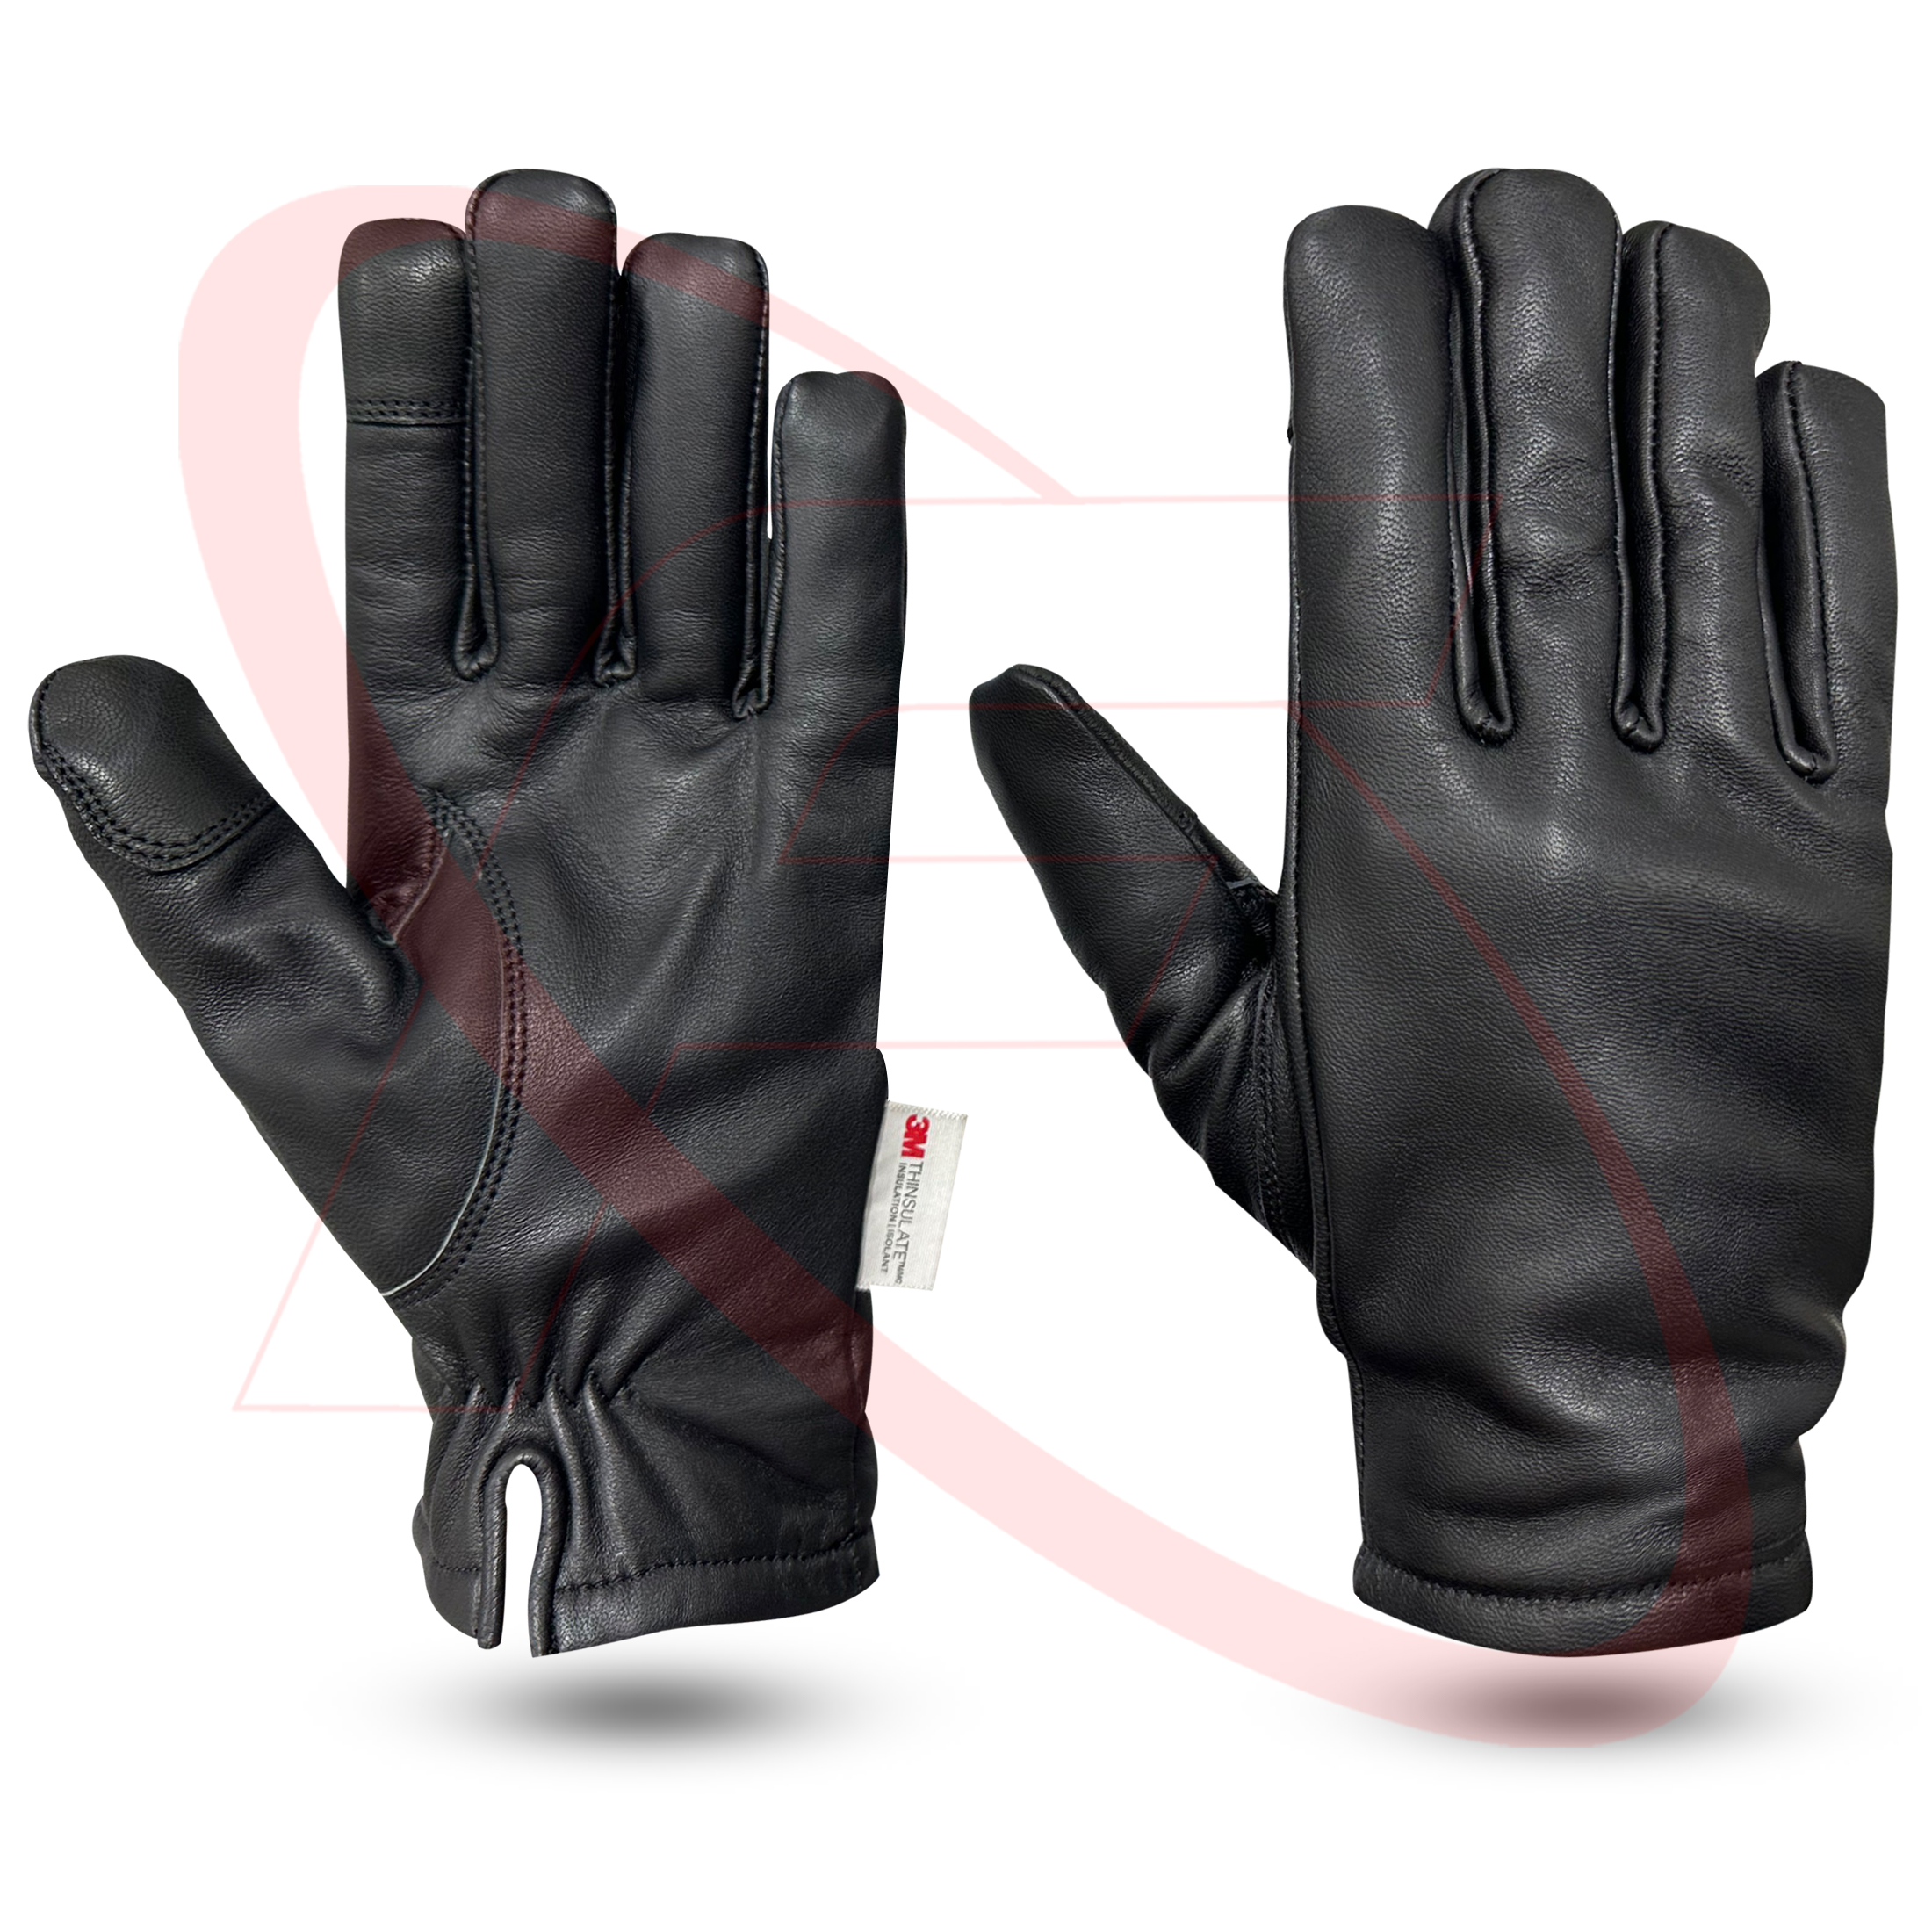 Ladies Dressing Gloves made in Sheepskin Leather Top Quality Winter Fancy Gloves Fashion Daily Wear Fashionable Gloves